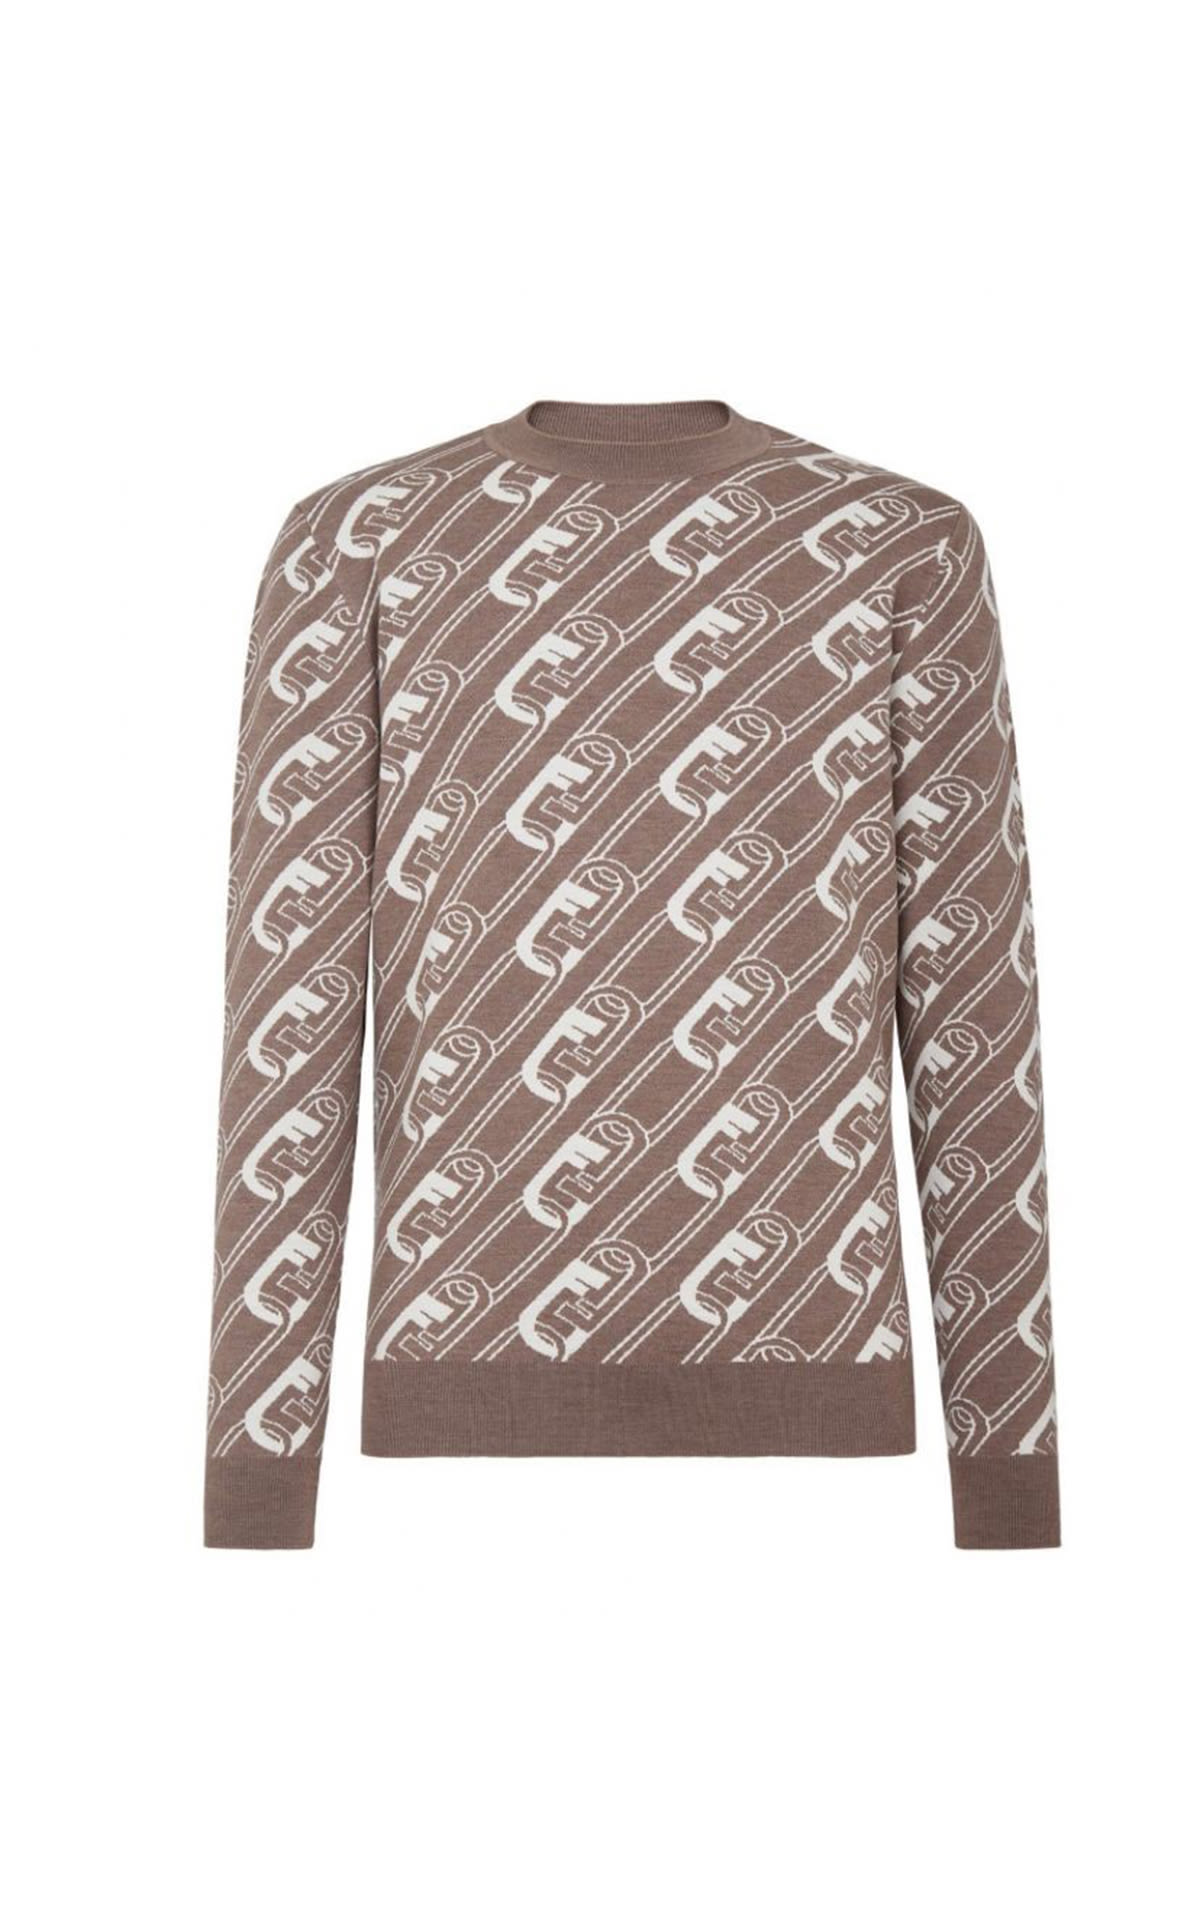 Fendi chain link sweater from Bicester Village